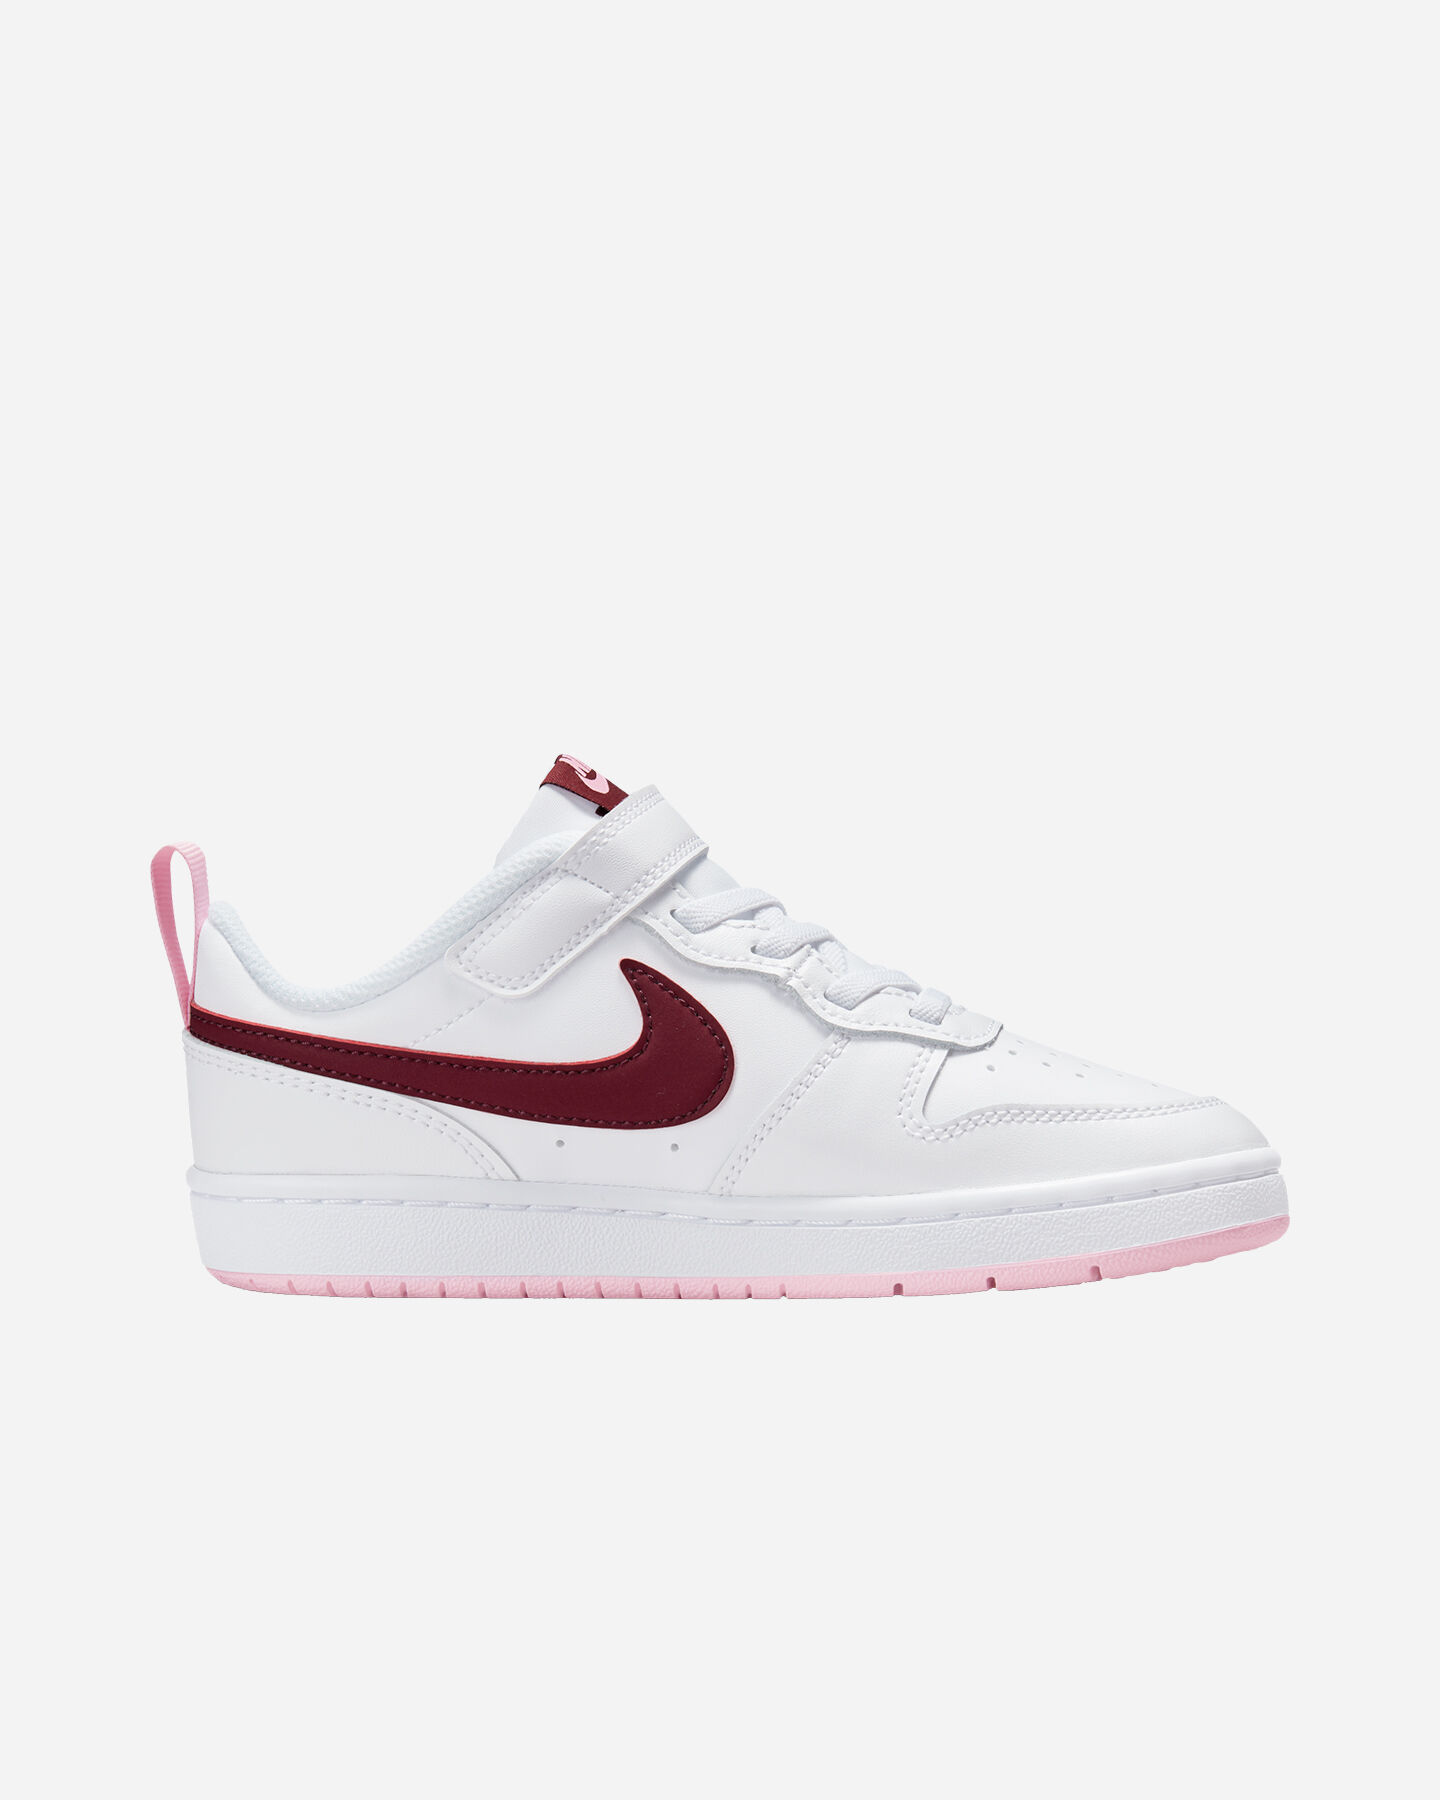  Scarpe sneakers NIKE COURT BOROUGH LOW 2 PS JR S5339378|120|1Y scatto 0